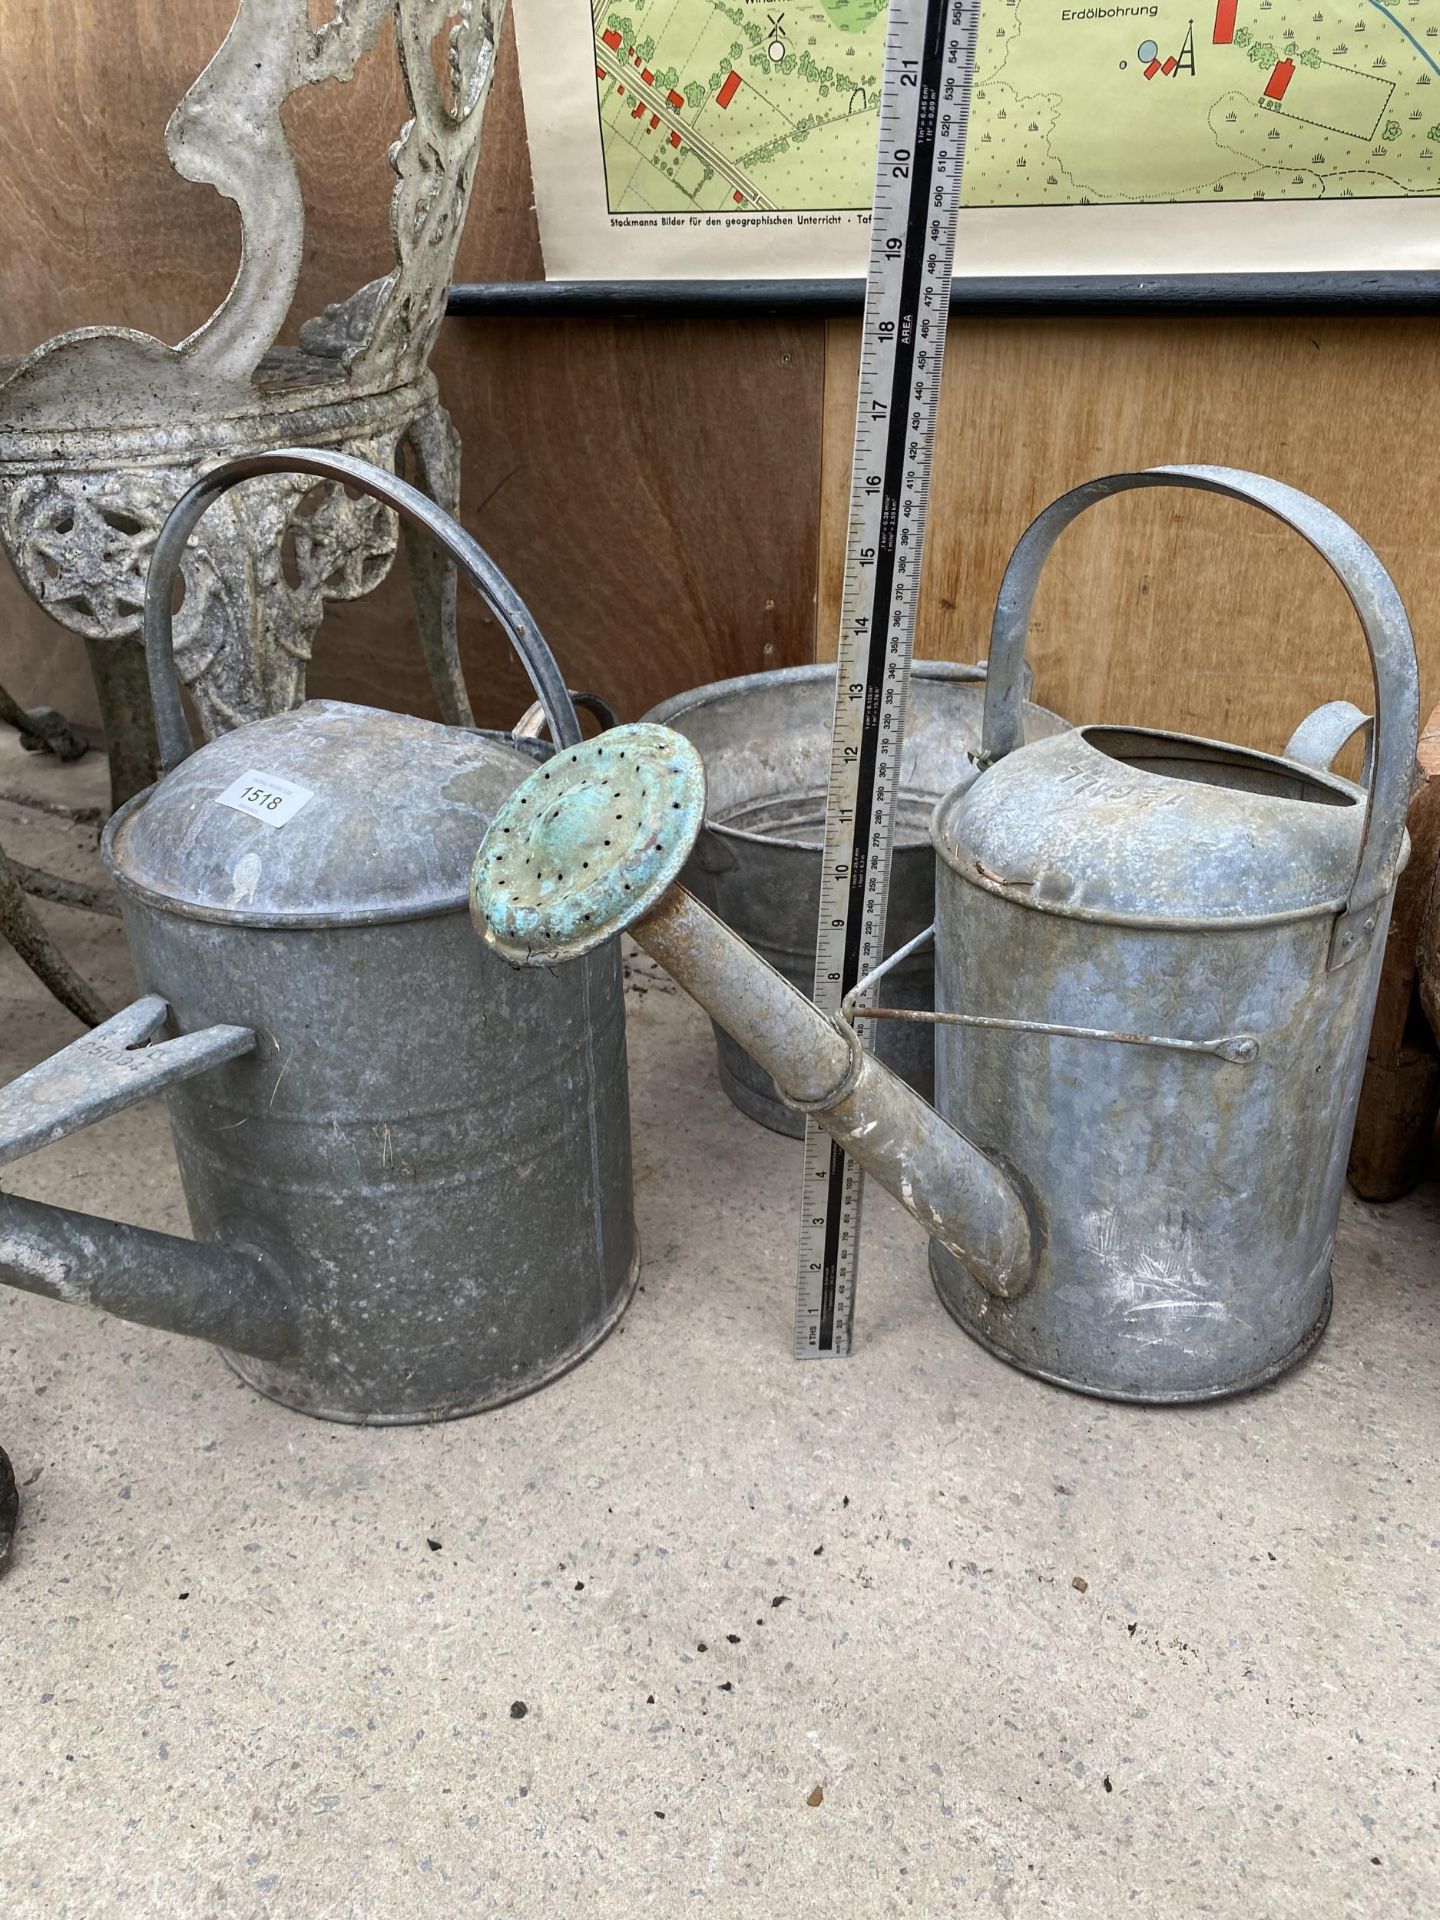 TWO VINTAGE GALVANISED WATERING CANS AND A GALVANISED BUCKET - Image 3 of 3